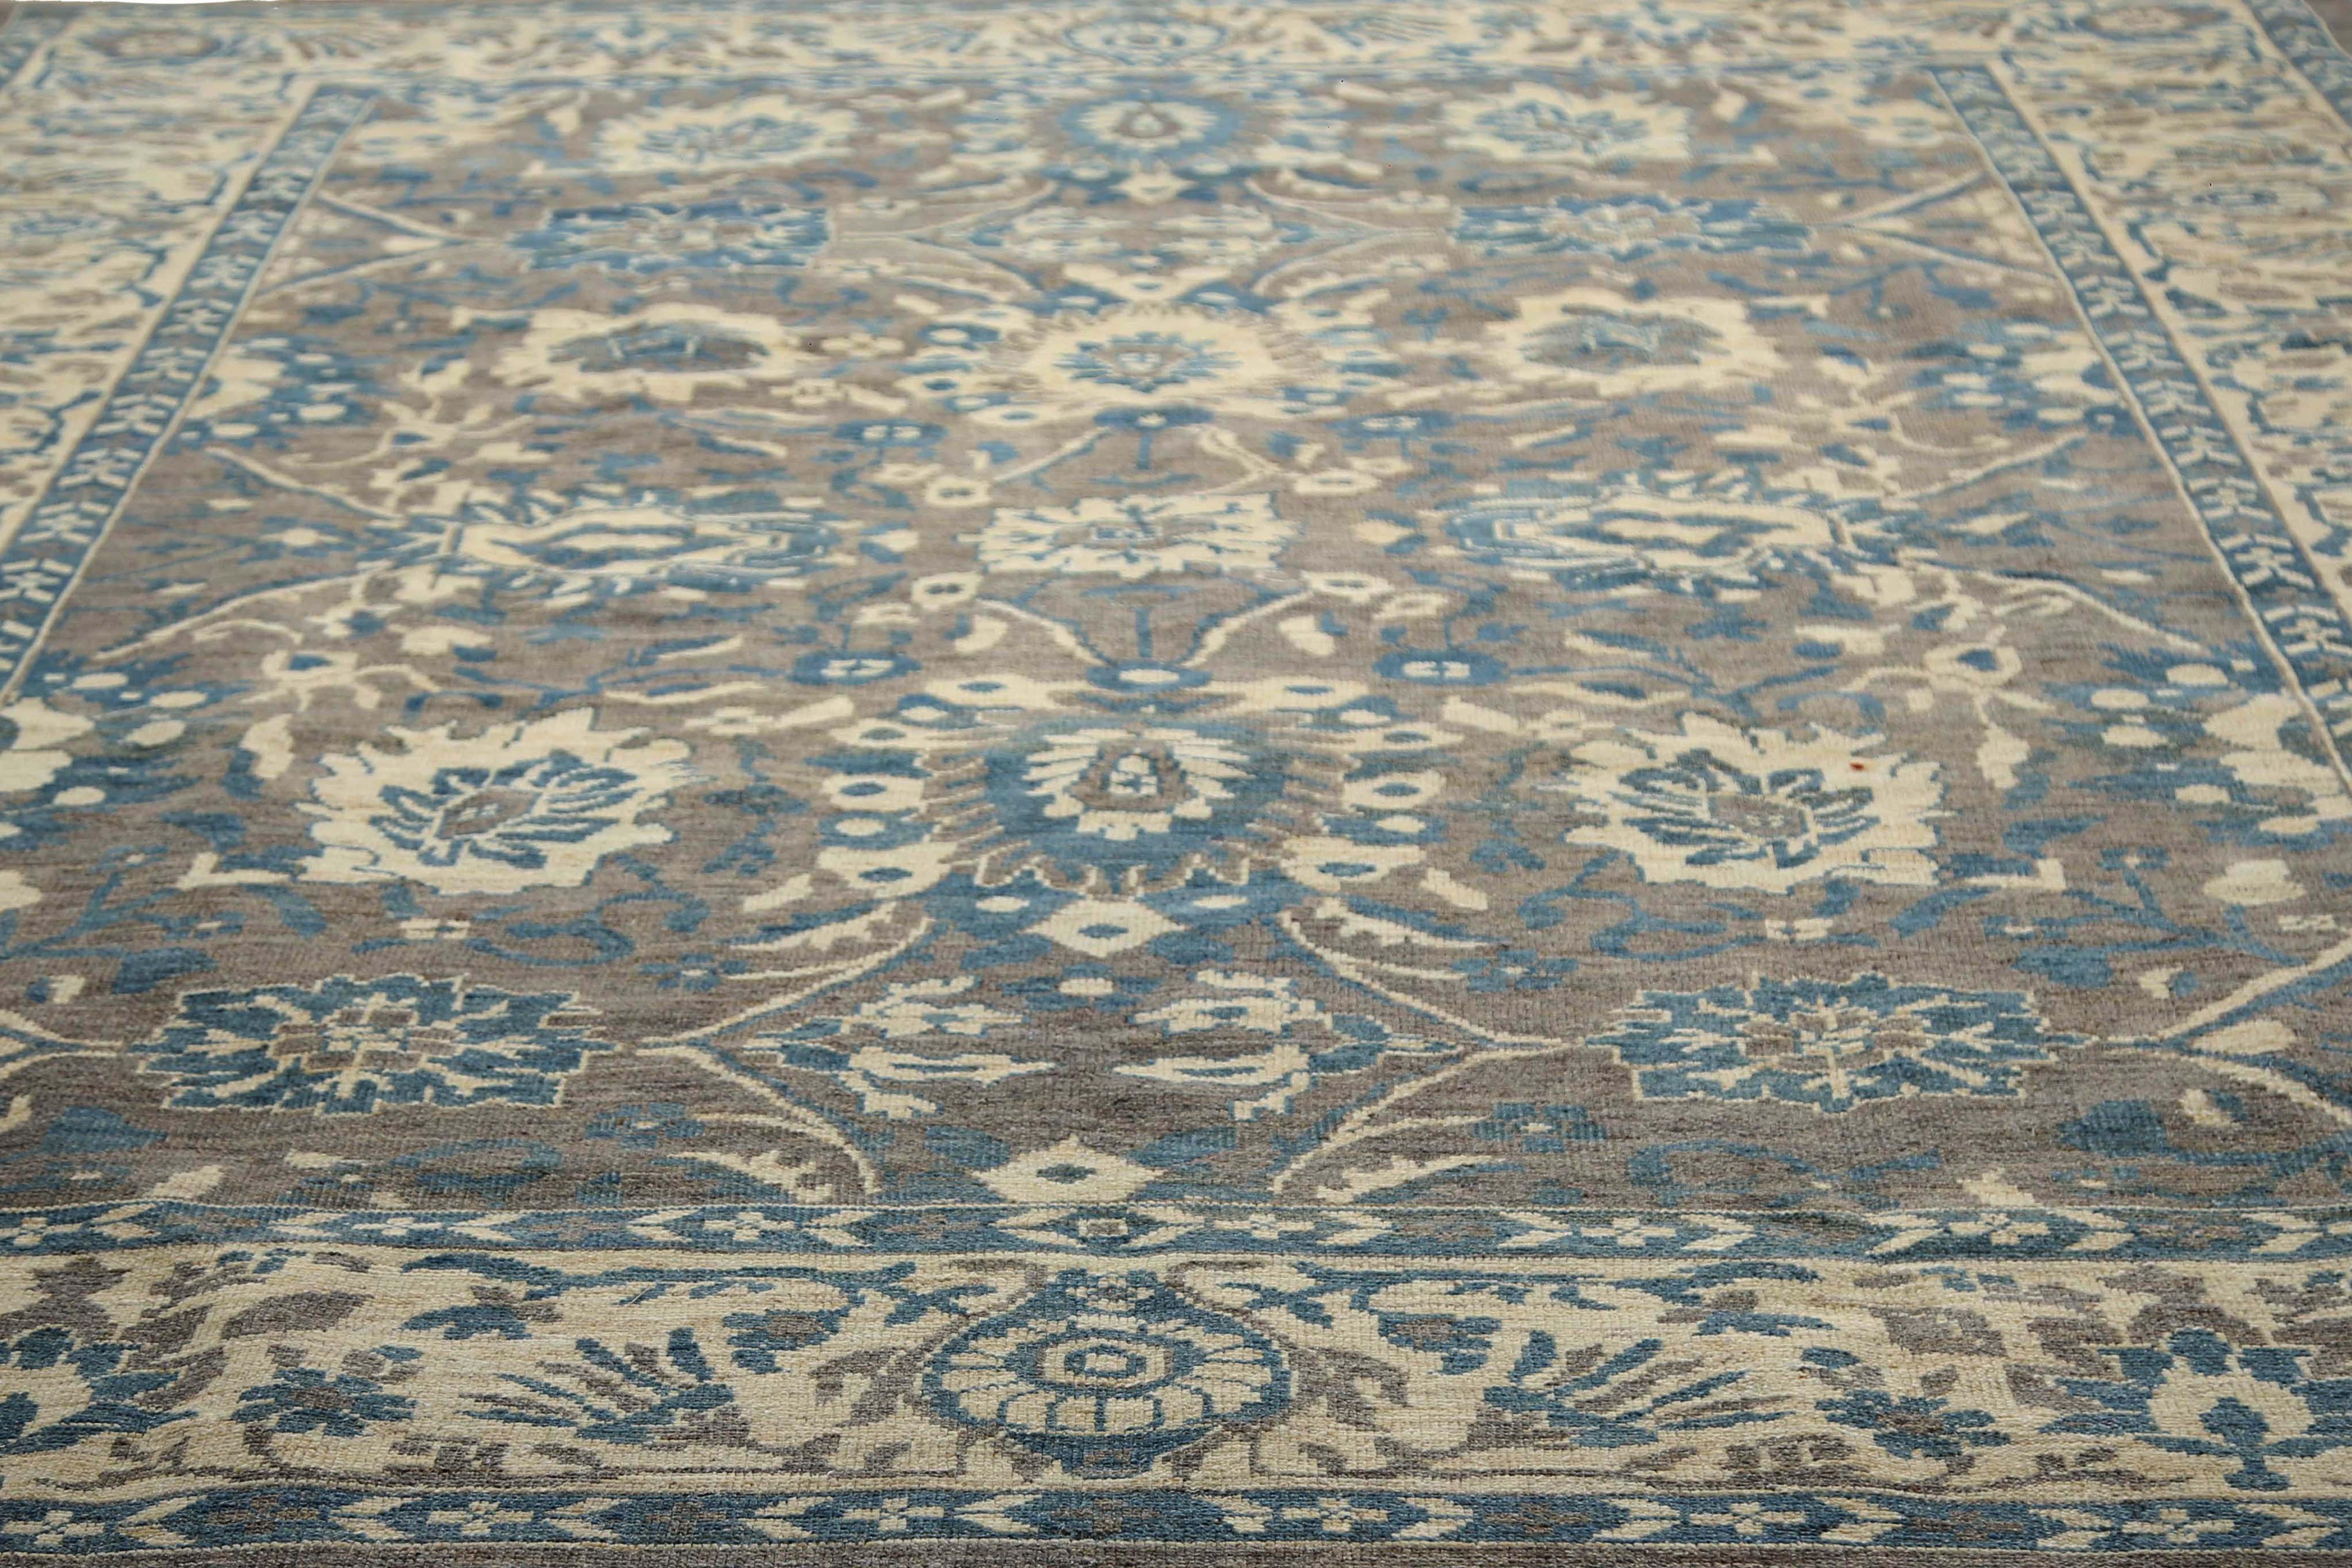 Contemporary Luxurious Handmade Sultanabad Rug - Traditional Design, Blue, Grey, and Beige To For Sale